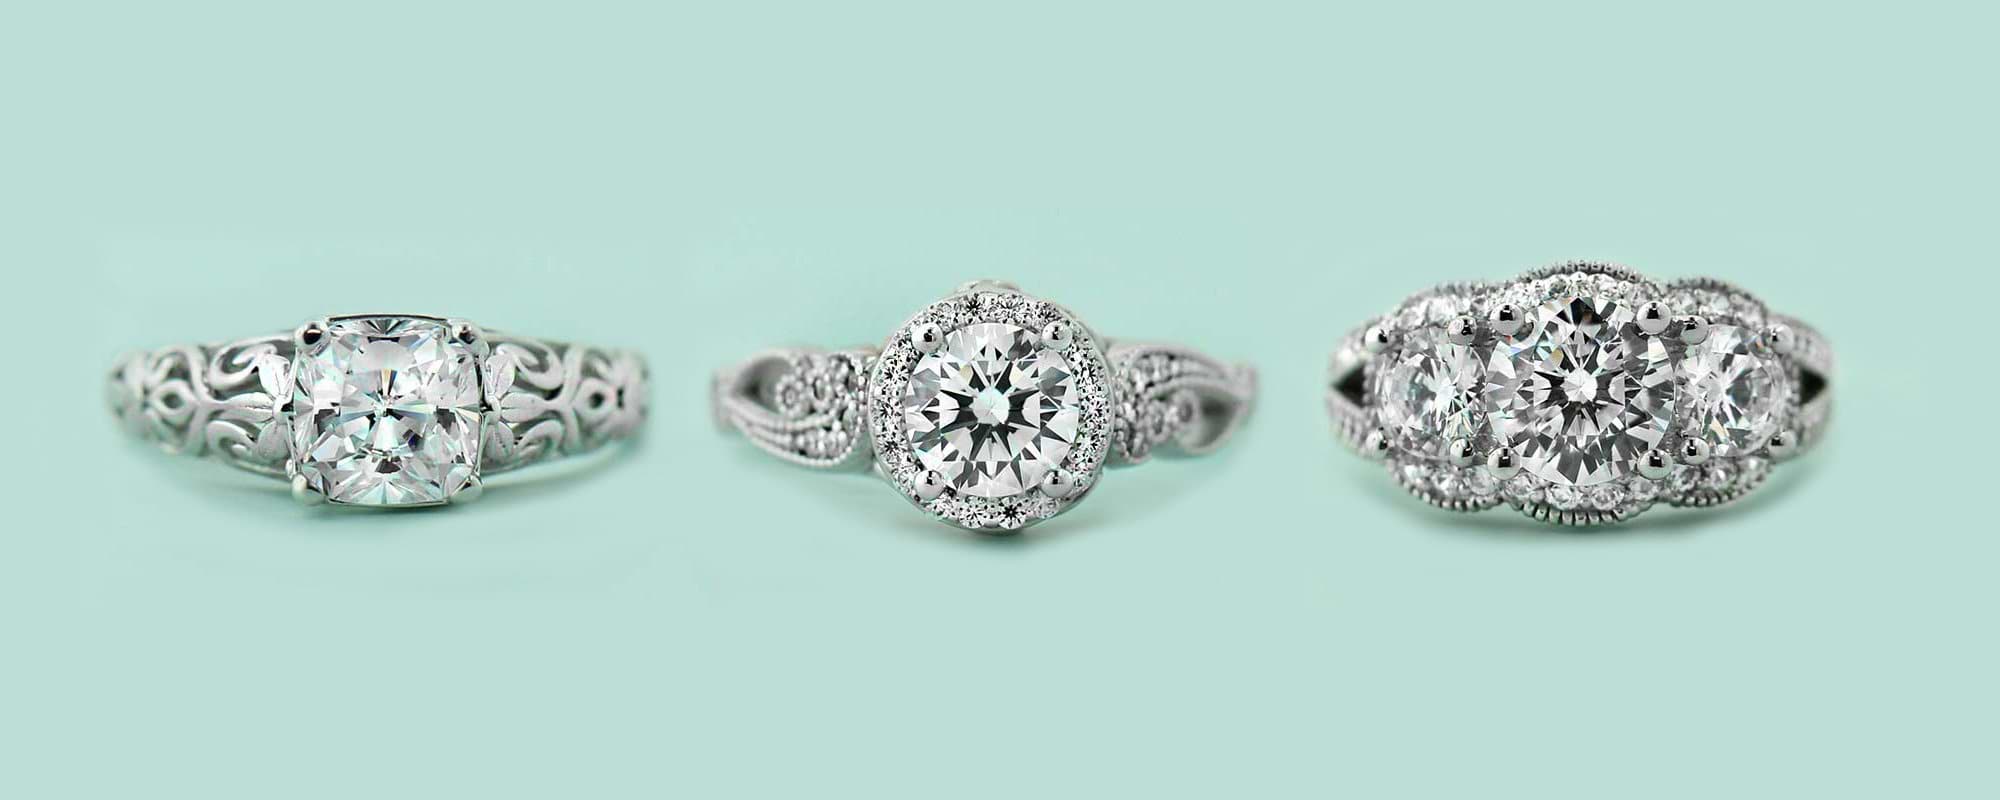 Is the Vintage Engagement Ring Trend Here to Stay?